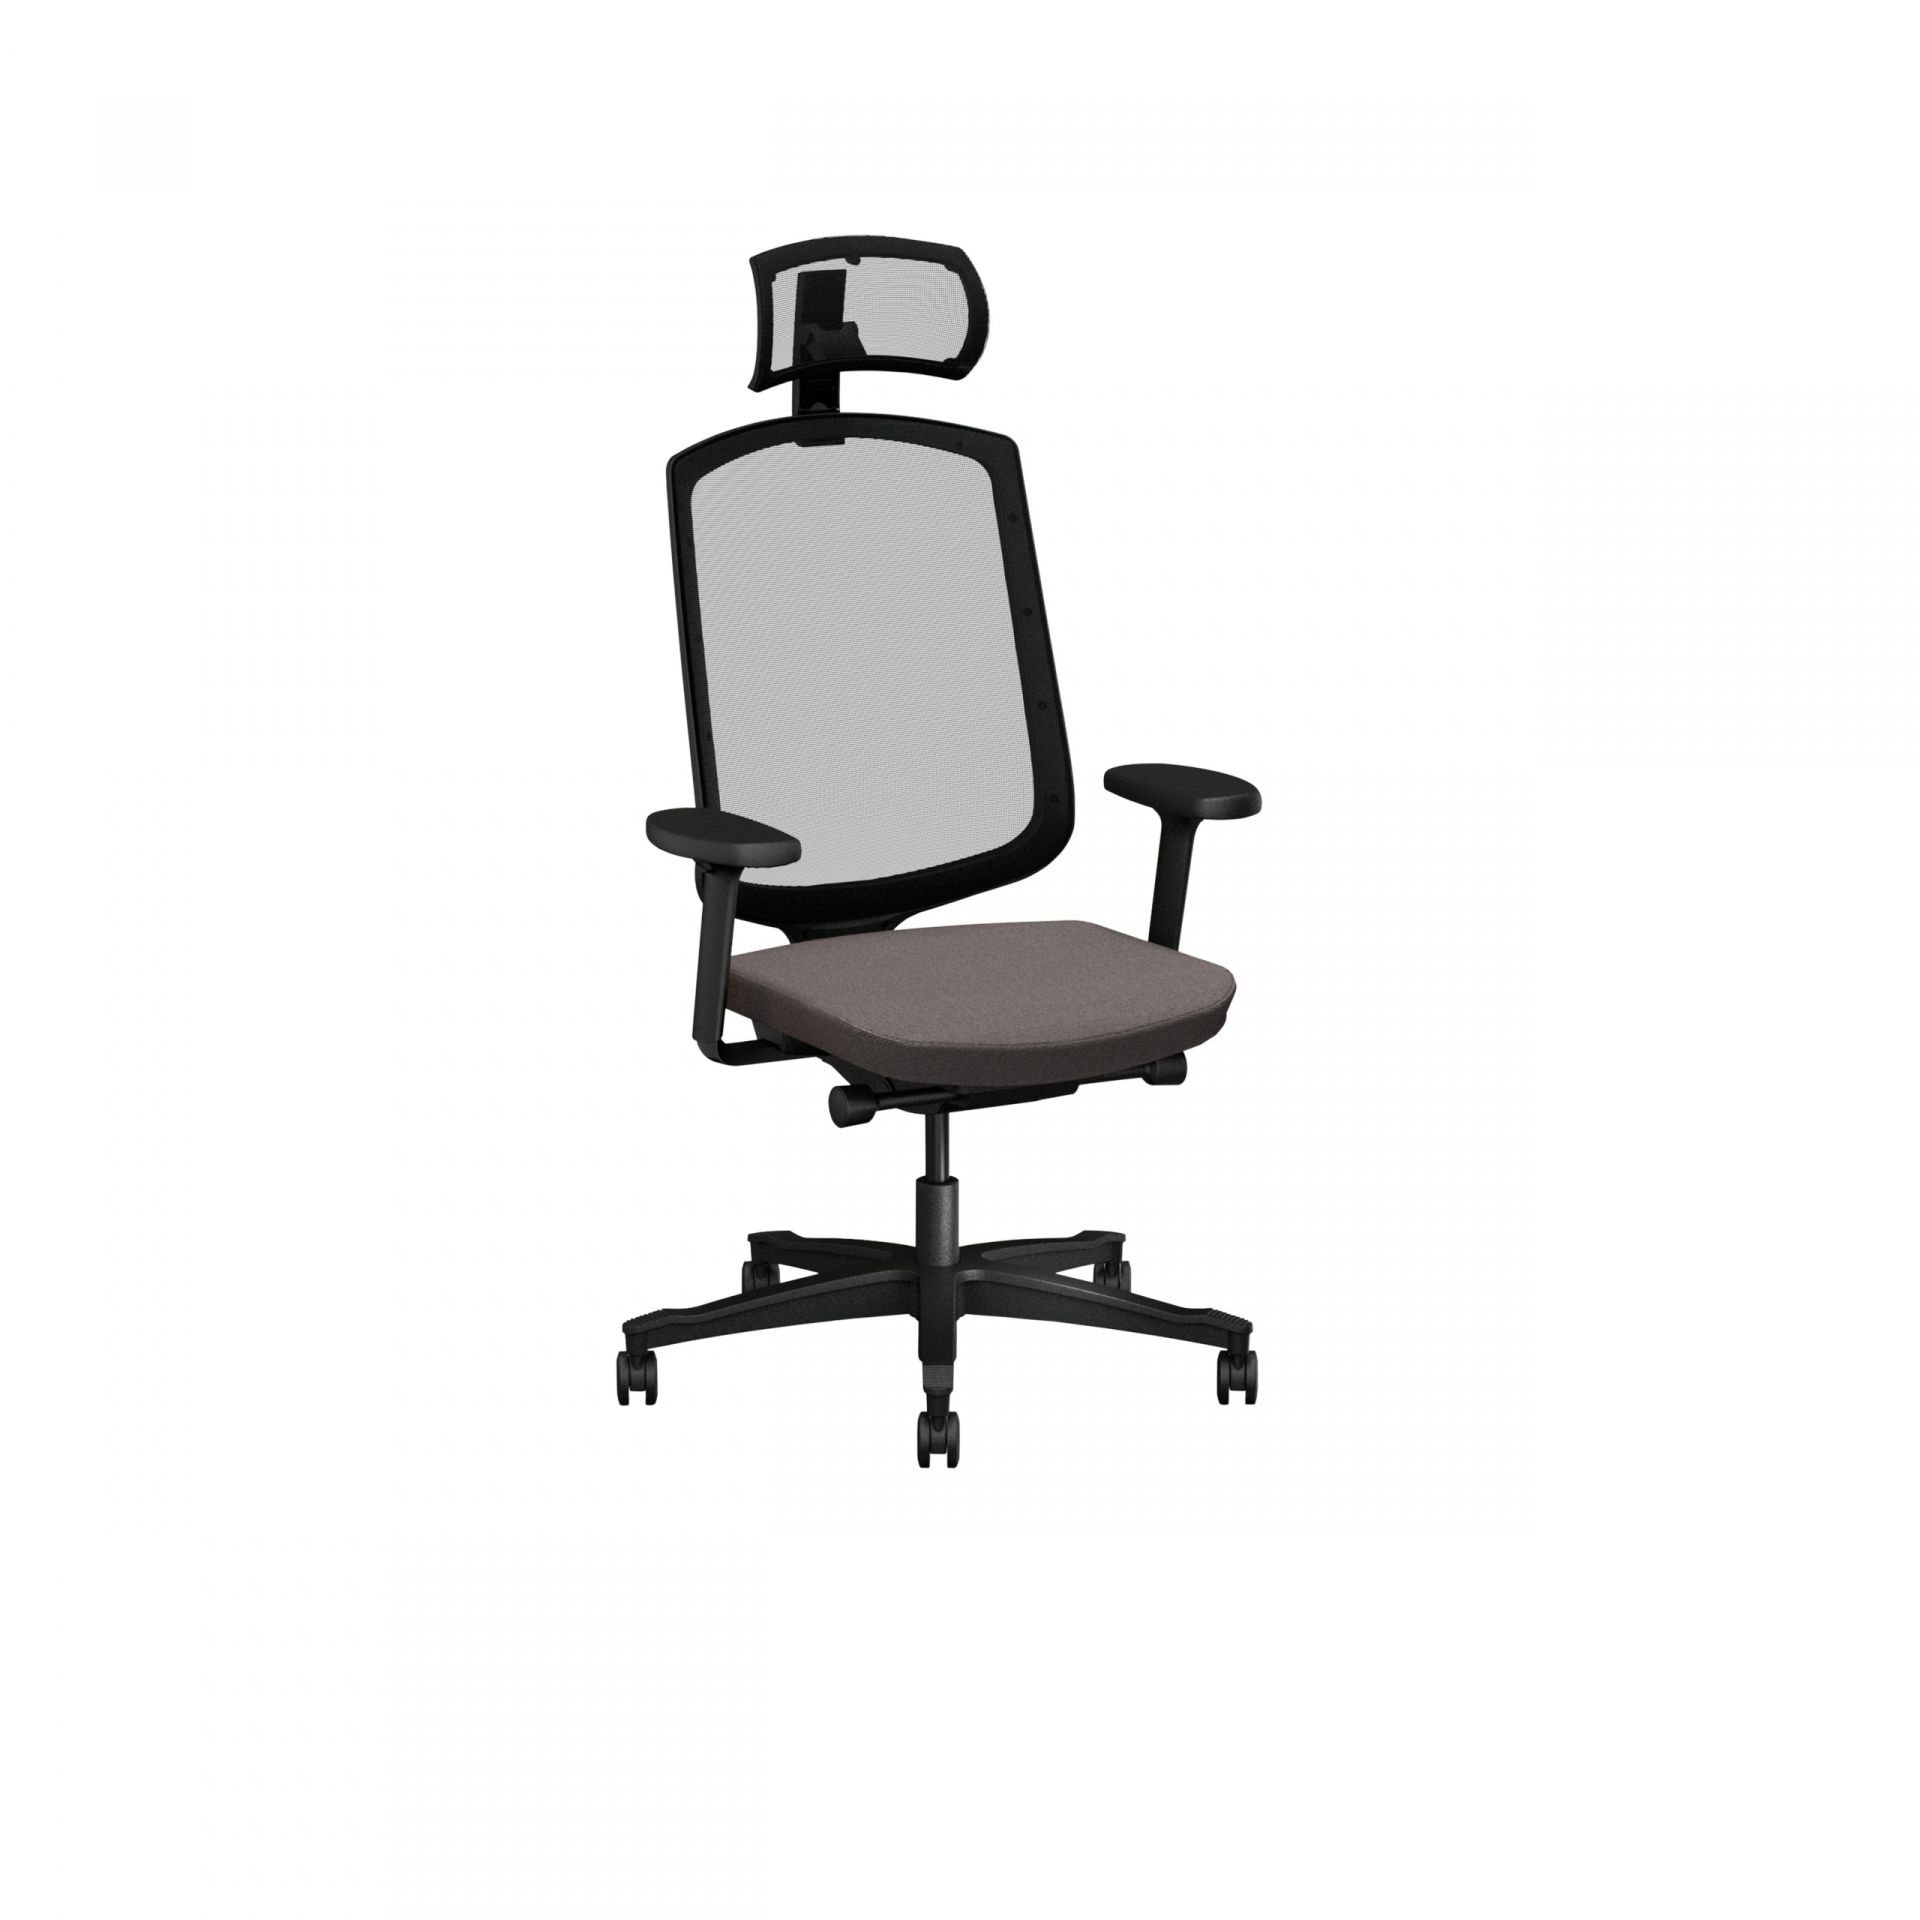 One Office chair with easy adjustments thumbnail image 1